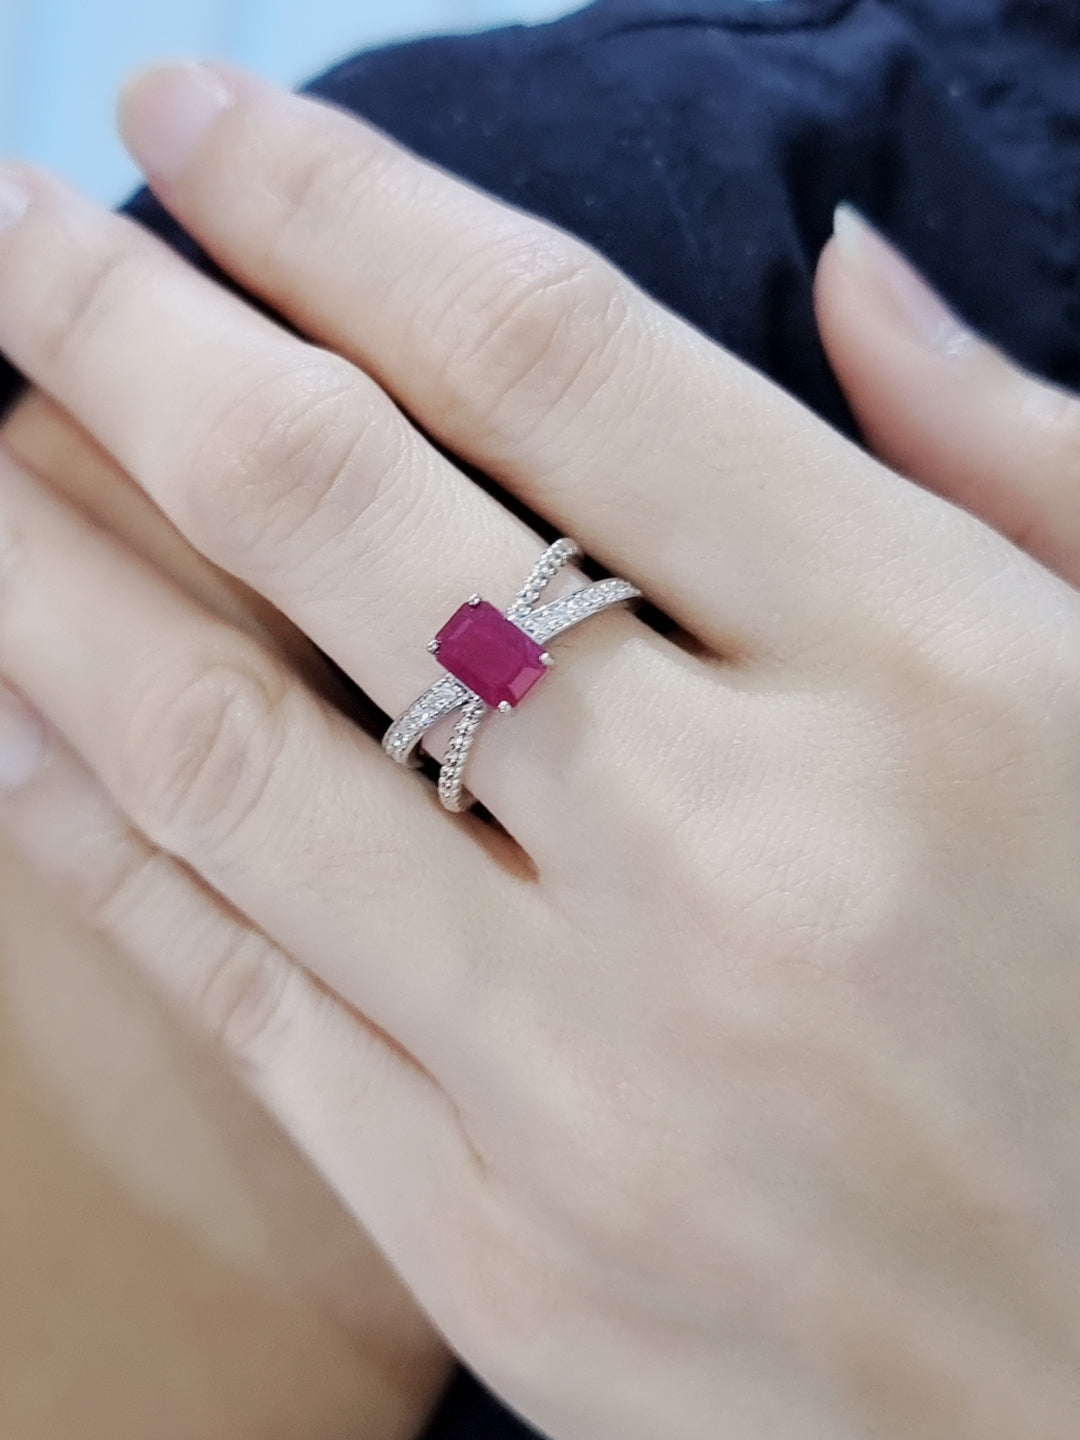 Ruby And Diamond Ring In 18k White Gold.